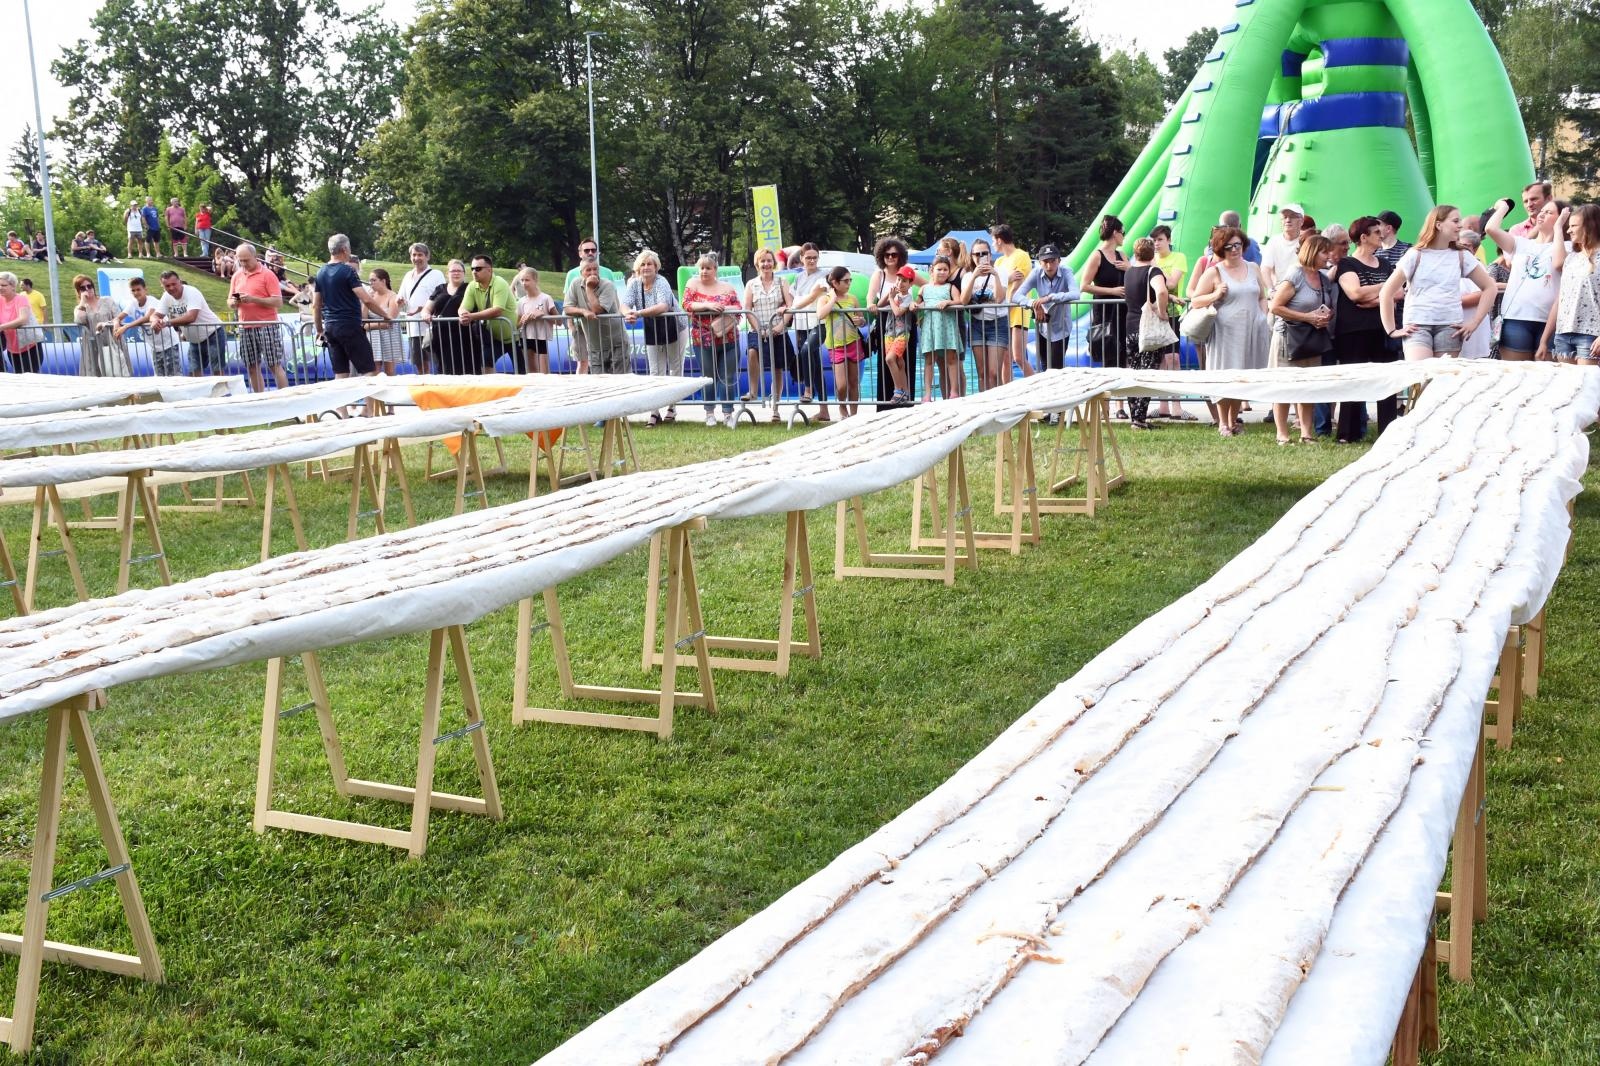 Largest Measuring Cup: World Kitchen breaks Guinness World Records record